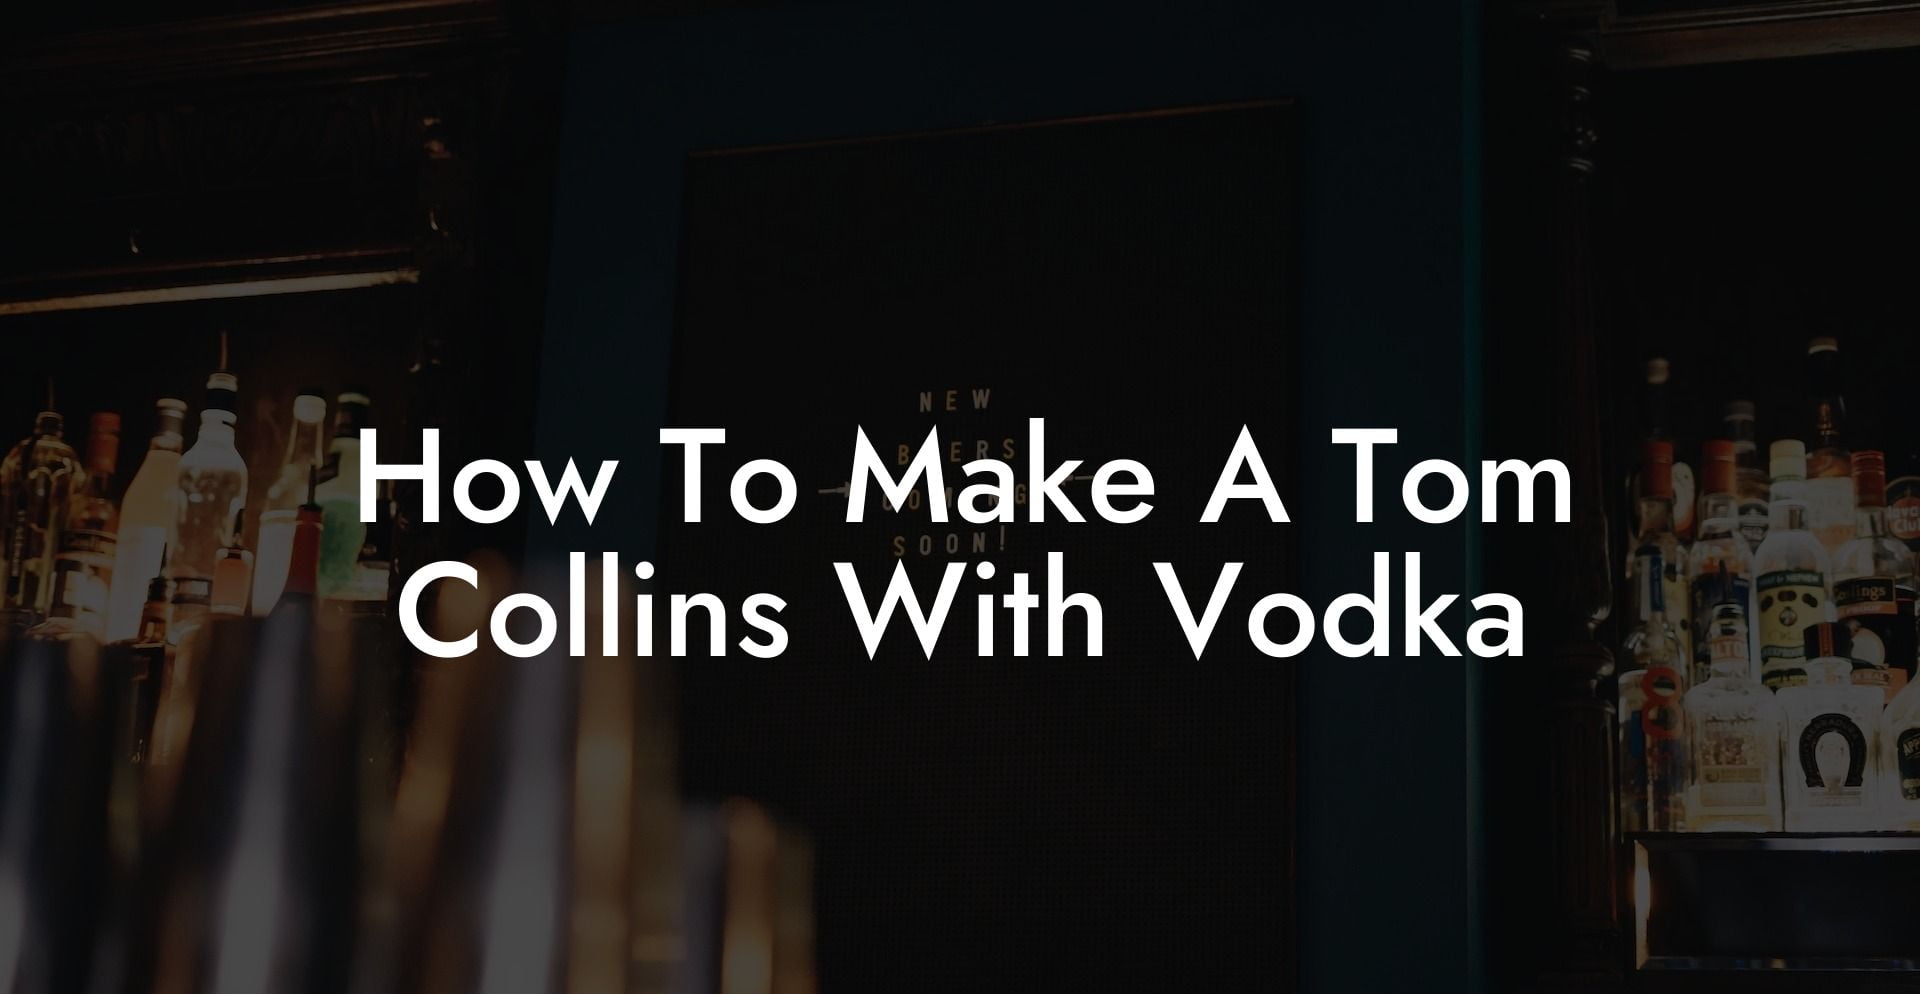 How To Make A Tom Collins With Vodka